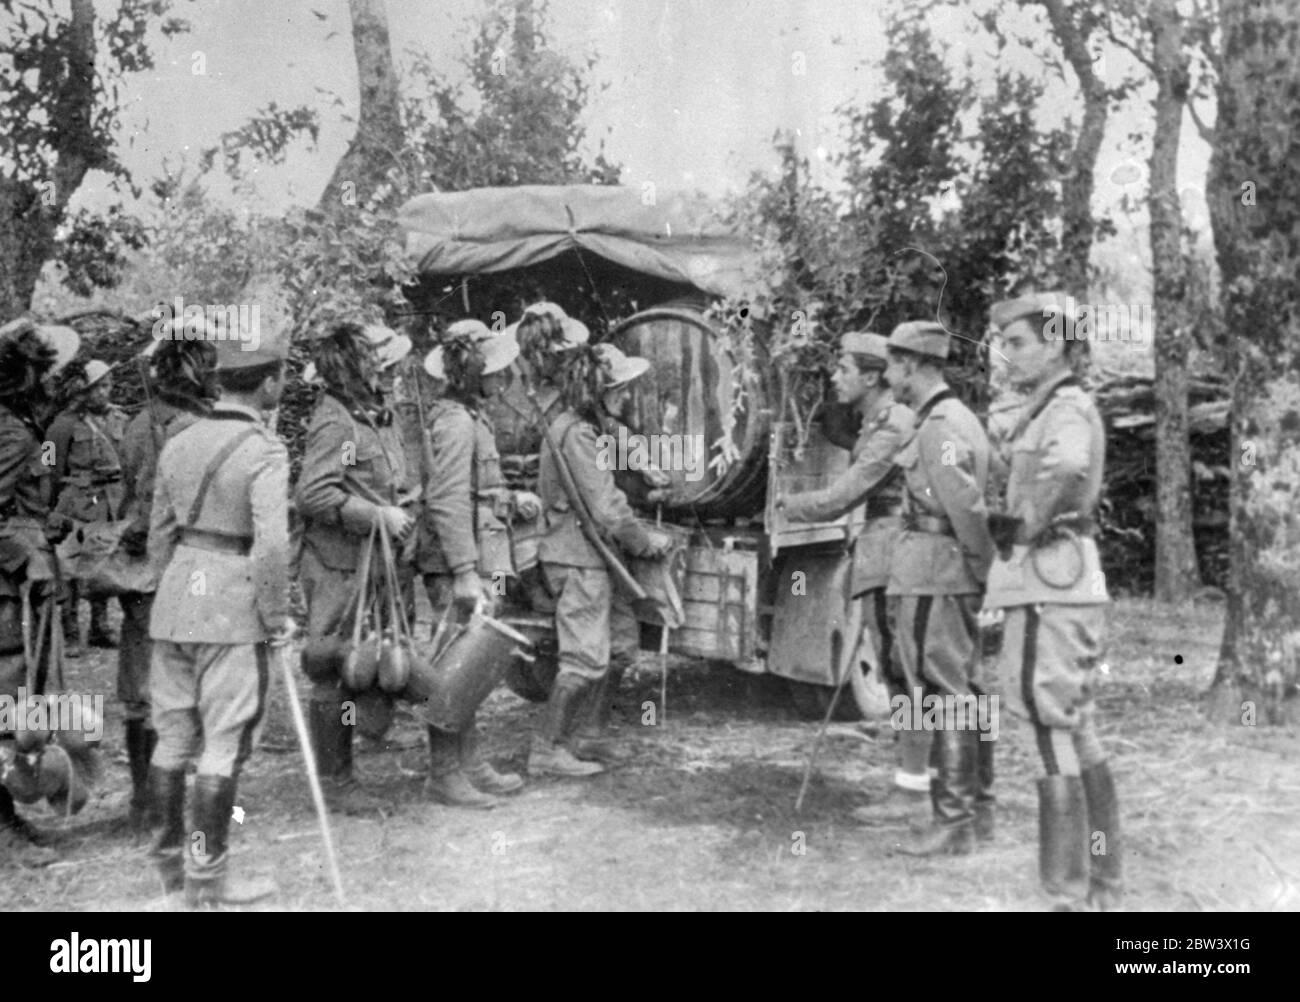 The Italian Must Have His Wine - Even In  War  ! Army wagons bearing huge casks are a welcome sight to thirsty Italian soldiers taking part in the manoeuvres in Irpinia . They know that the wine issue is not far off ! Photo shows : Italian soldiers with camouflaged helmets receiving their wine issue on manoeuvres . 26 August 1936 Original caption from negative Stock Photo